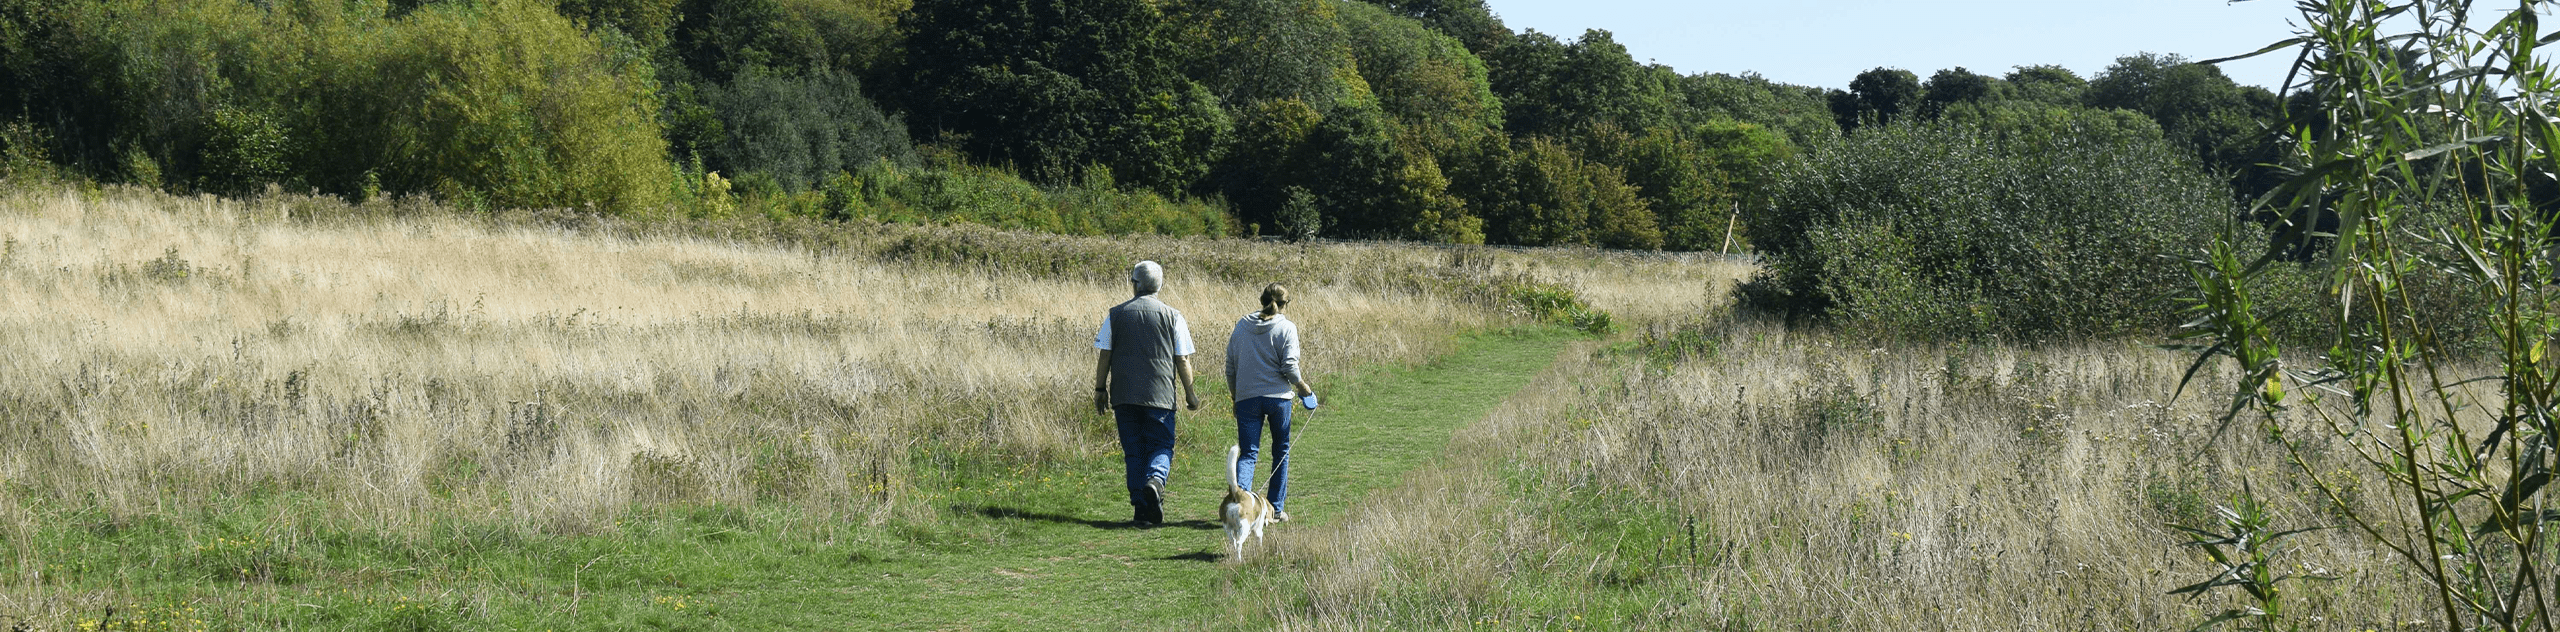 A photograph of people walking through grassland in a country park setting. © BMD